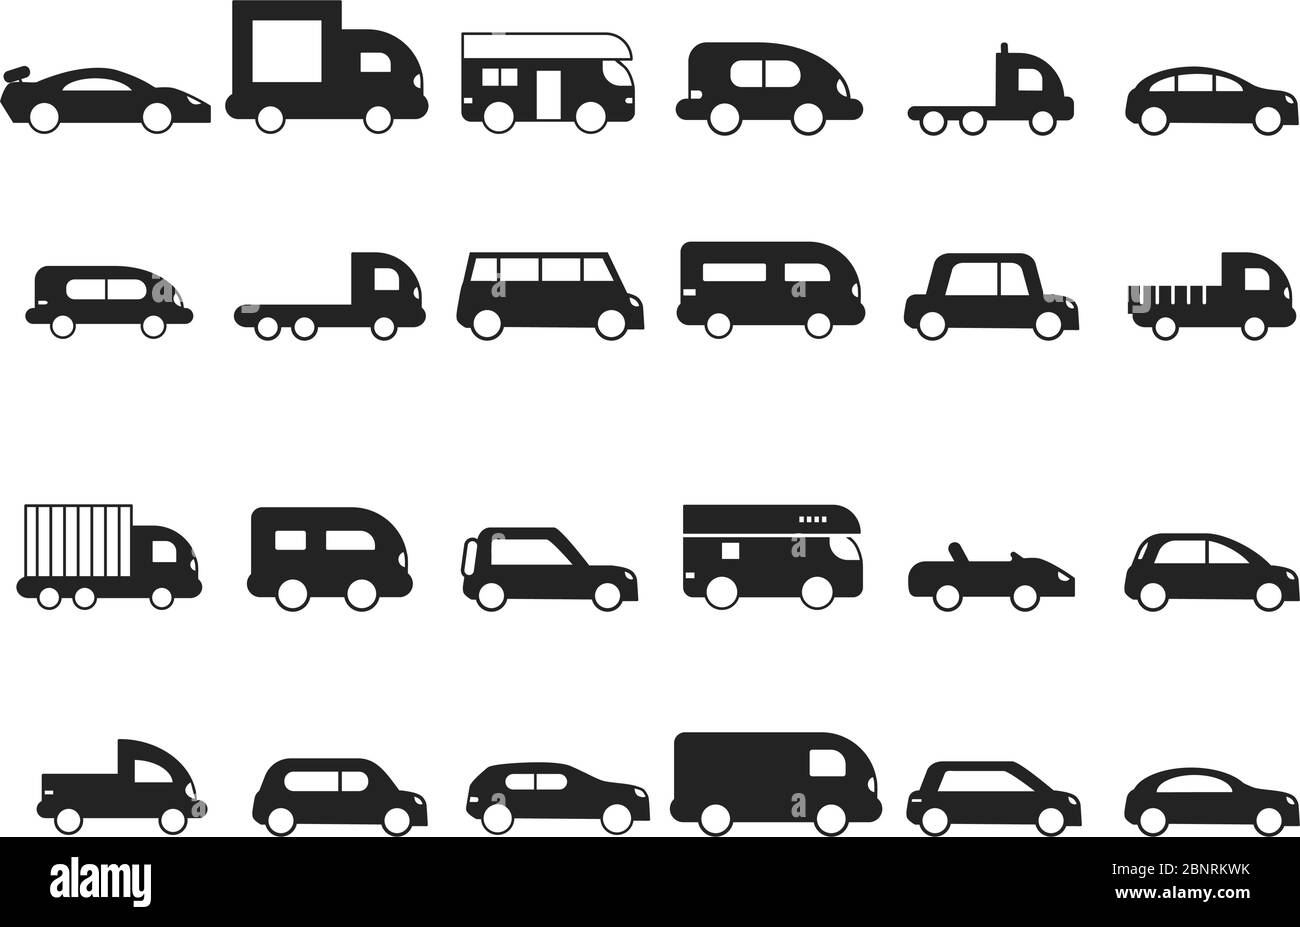 Car icons. Pictograms of black transport truck suv minivan vector silhouettes isolated Stock Vector